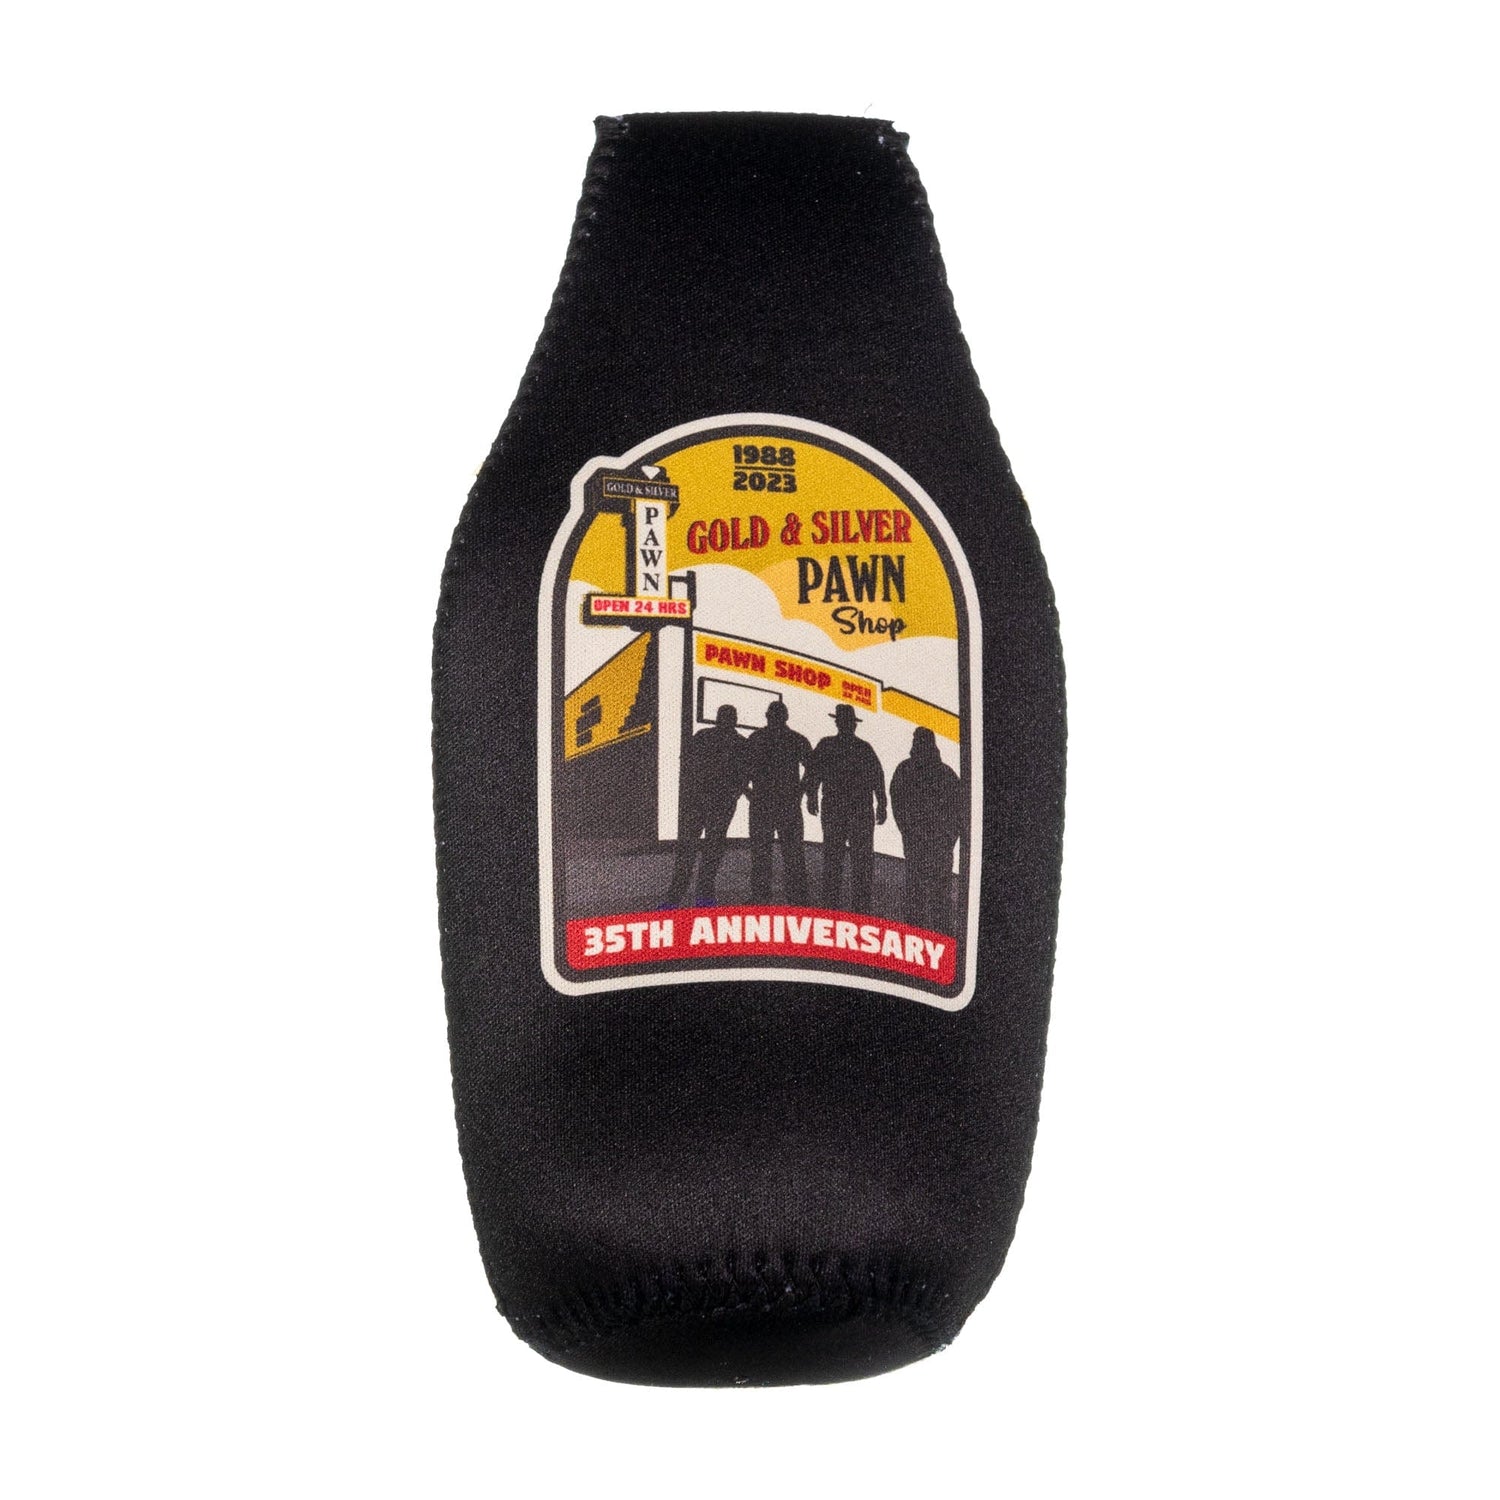 Gold & Silver Pawn Shop 35th Anniversary Bottle Koozie Image